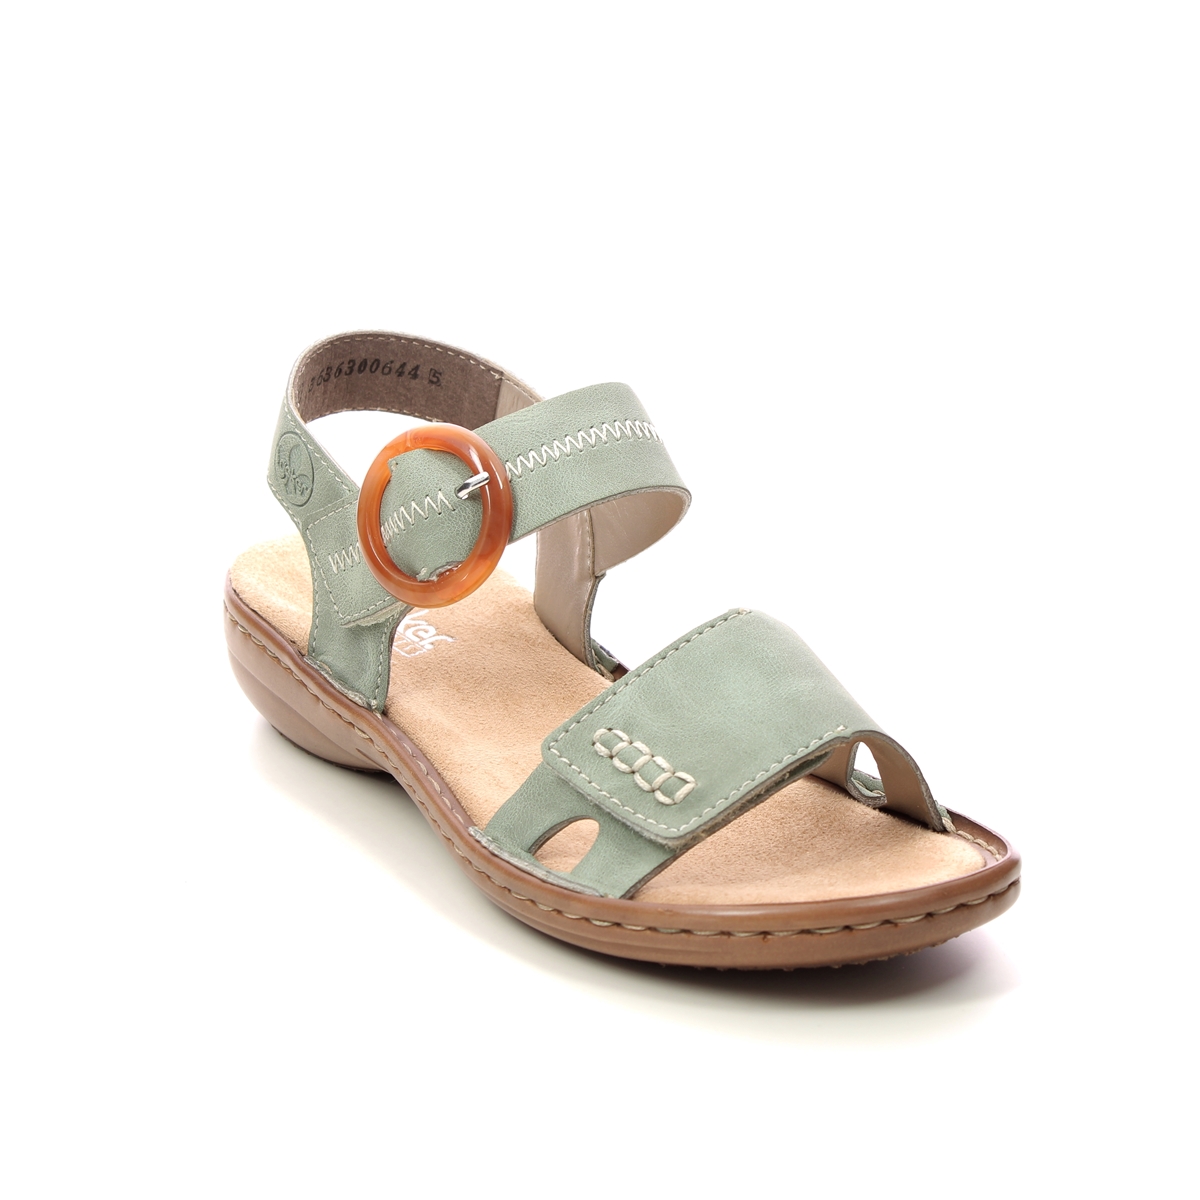 Rieker 608Z3-52 Mint green Womens Comfortable Sandals in a Plain Man-made in Size 39